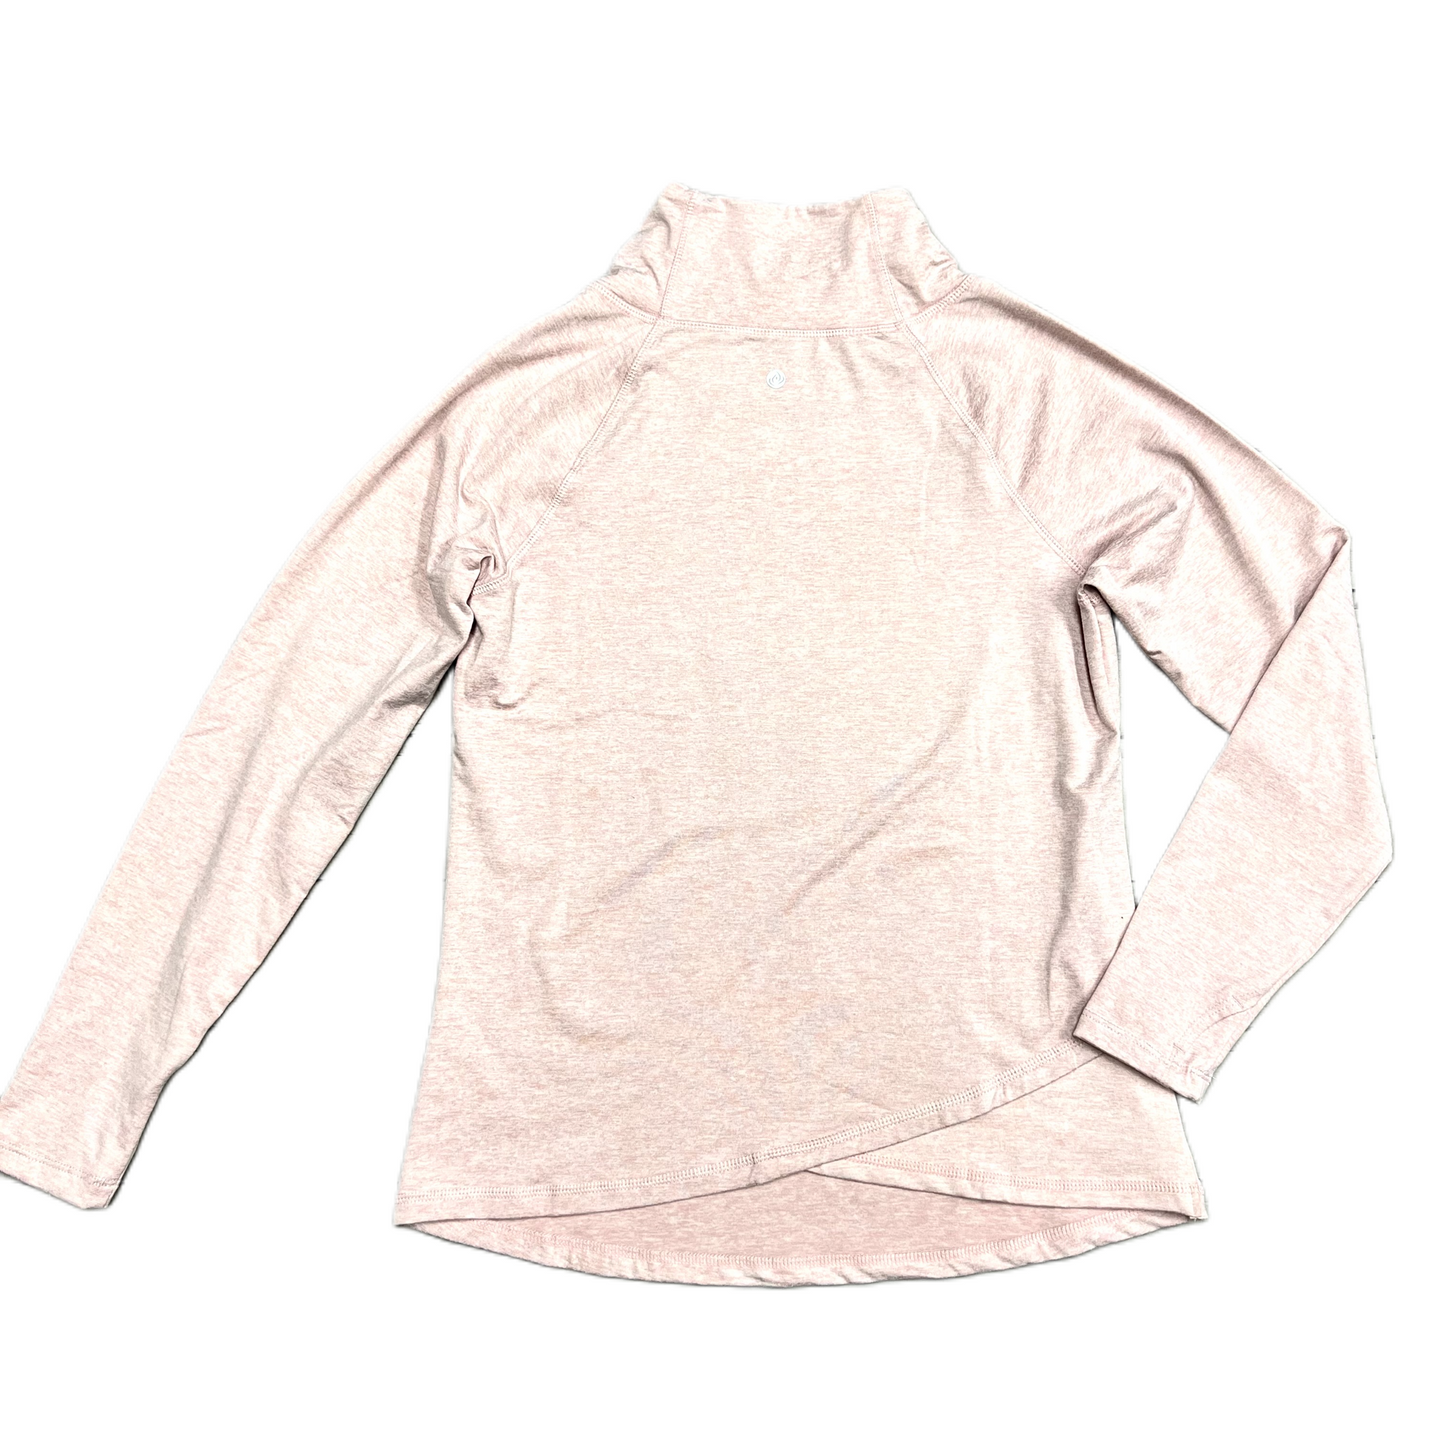 Pink Athletic Top Long Sleeve Collar By Apana, Size: M